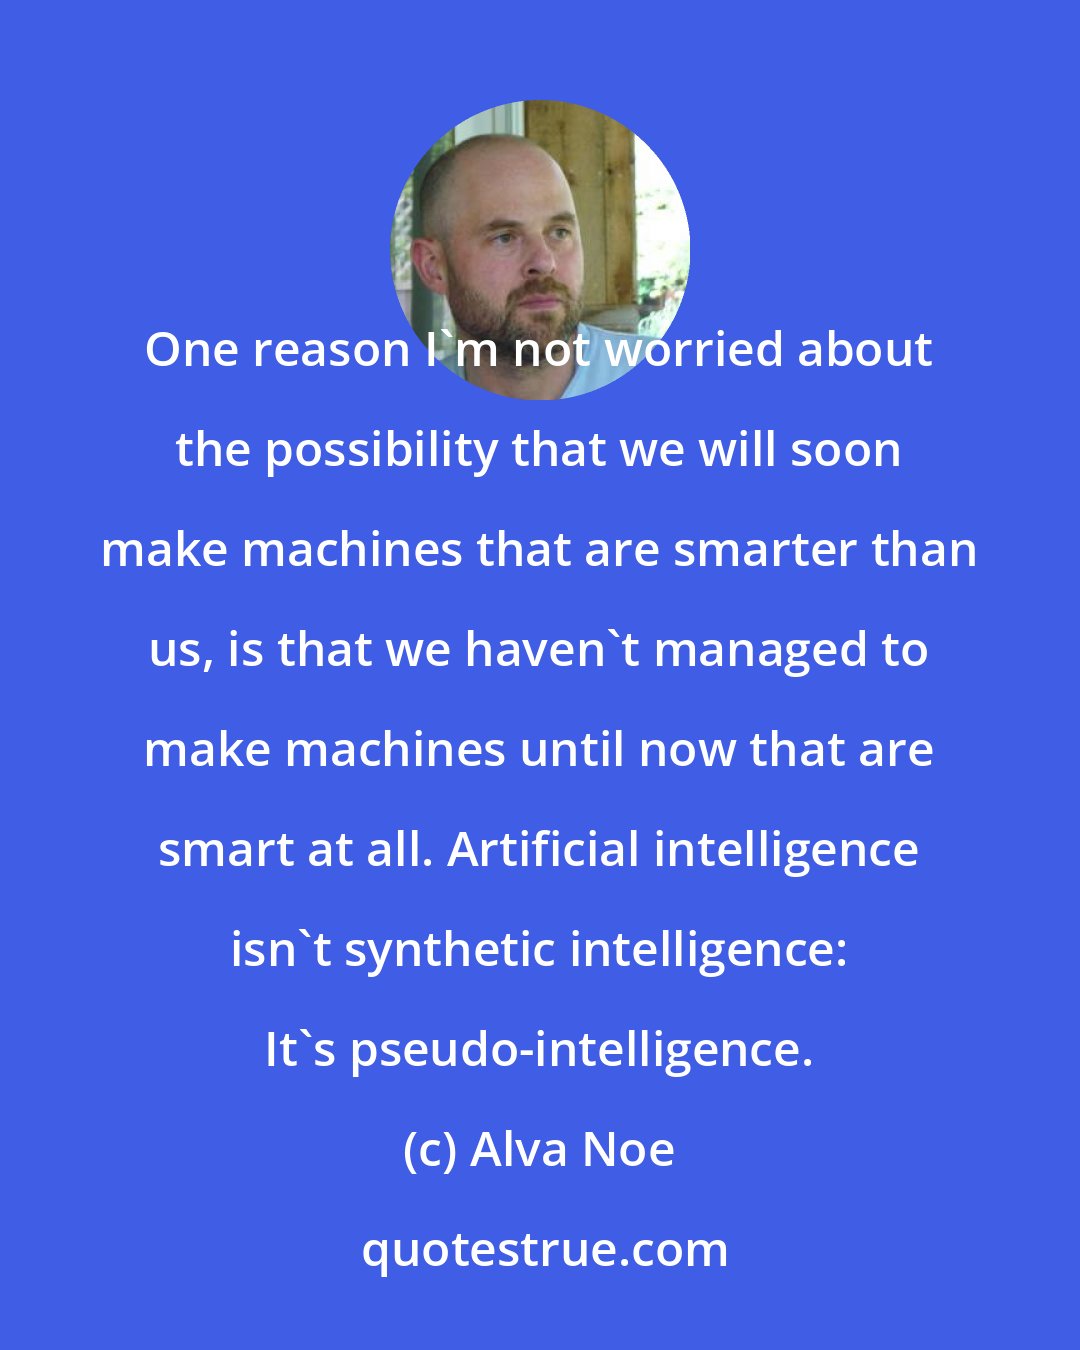 Alva Noe: One reason I'm not worried about the possibility that we will soon make machines that are smarter than us, is that we haven't managed to make machines until now that are smart at all. Artificial intelligence isn't synthetic intelligence: It's pseudo-intelligence.